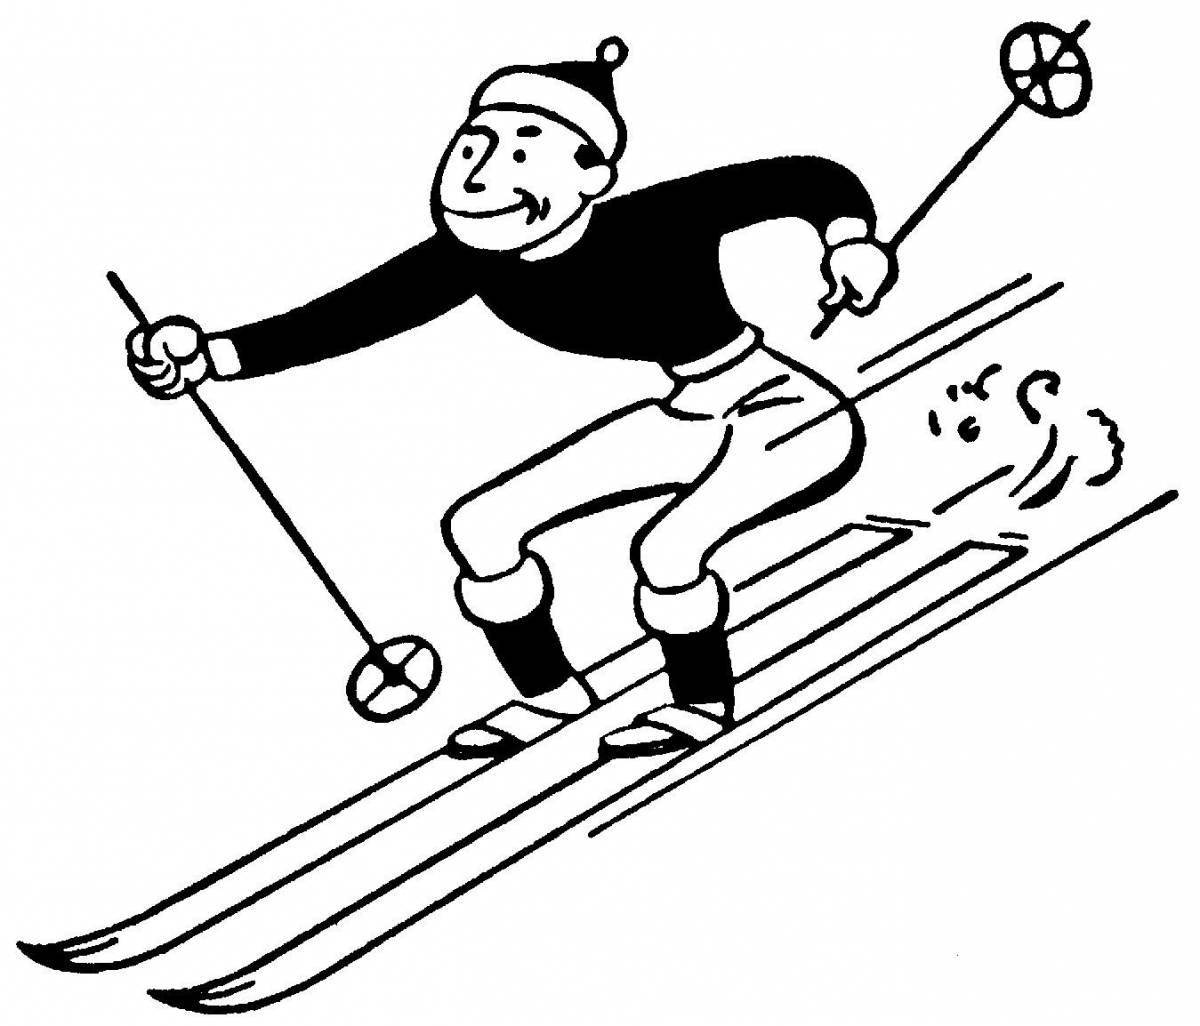 Ski race coloring page